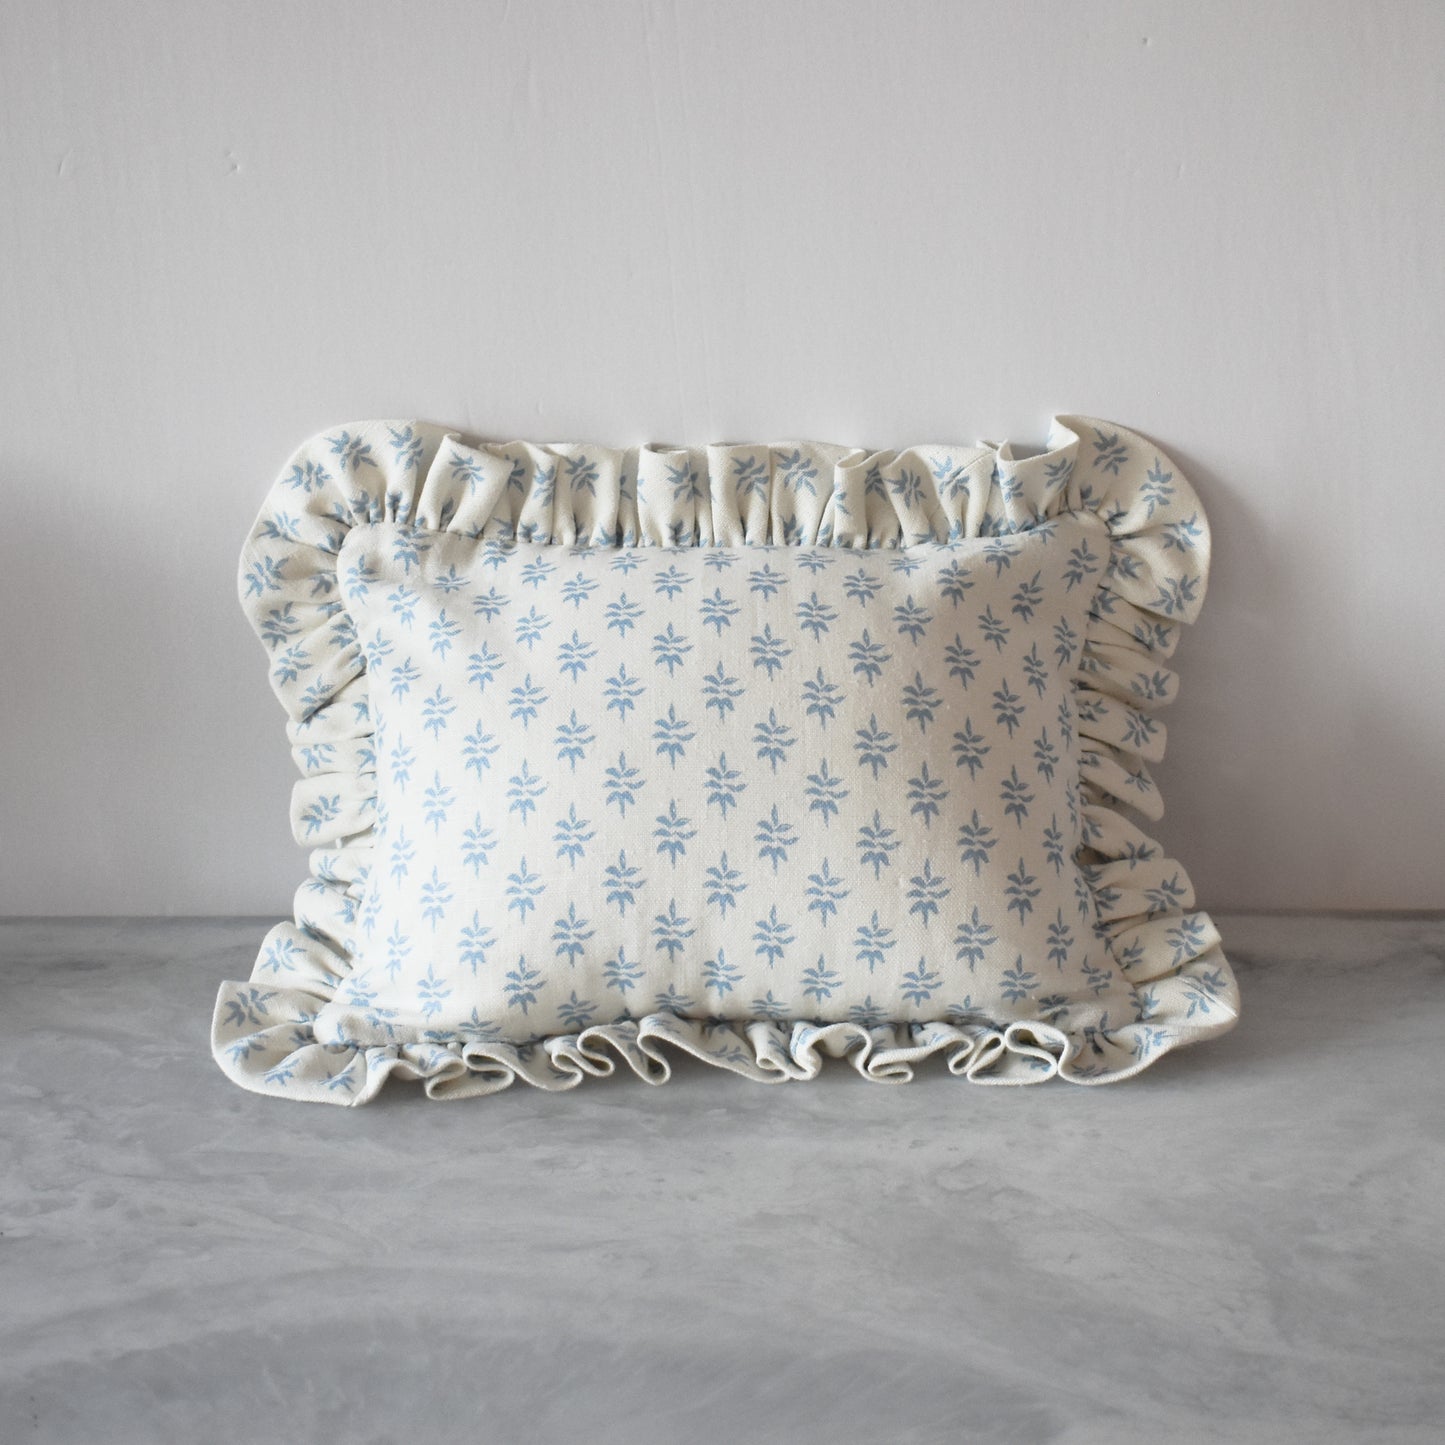 Laurel Leaf Pillow with Ruffle in Blue & Oyster